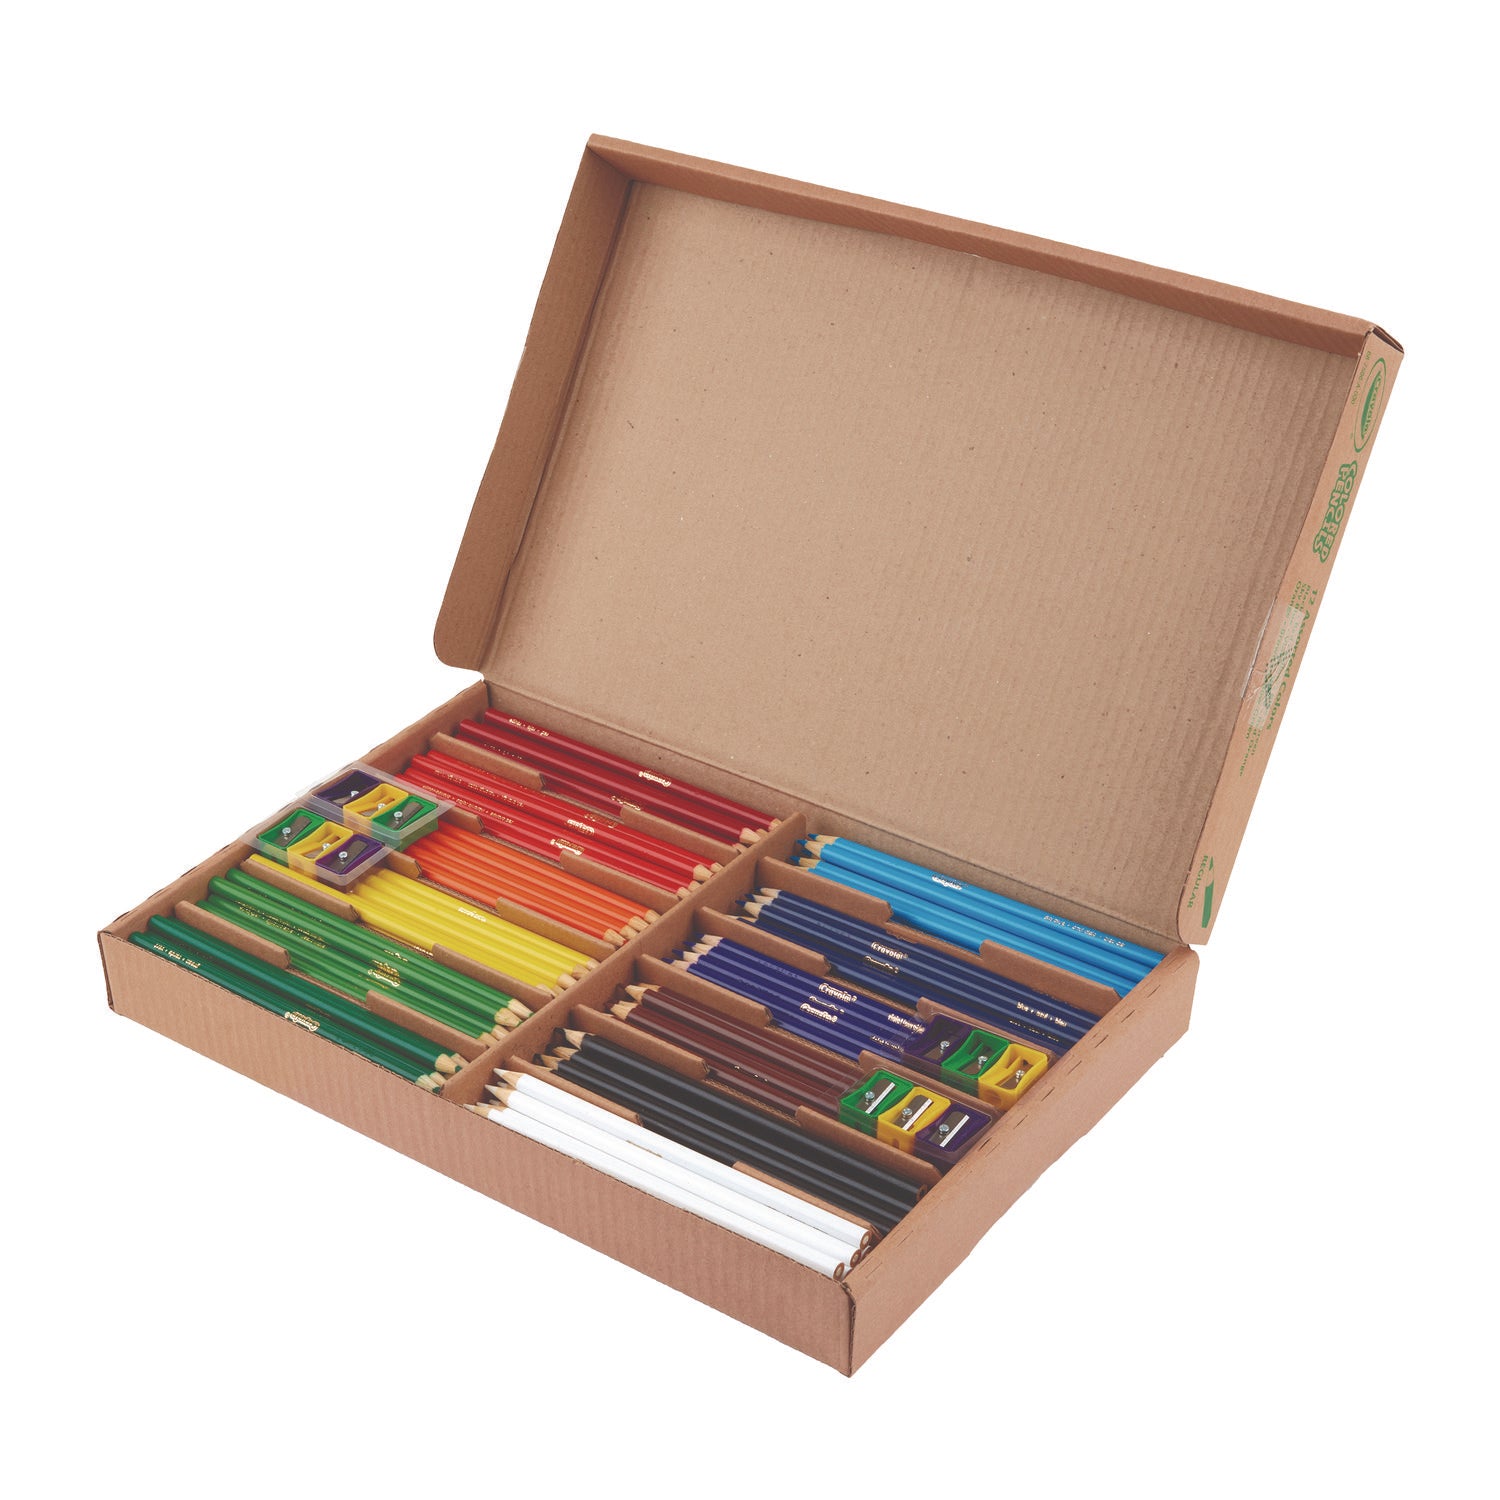 color-pencil-classpack-set-with-240-pencils-and-12-pencil-sharpeners-assorted-lead-and-barrel-colors-240-pack_cyo687506 - 4